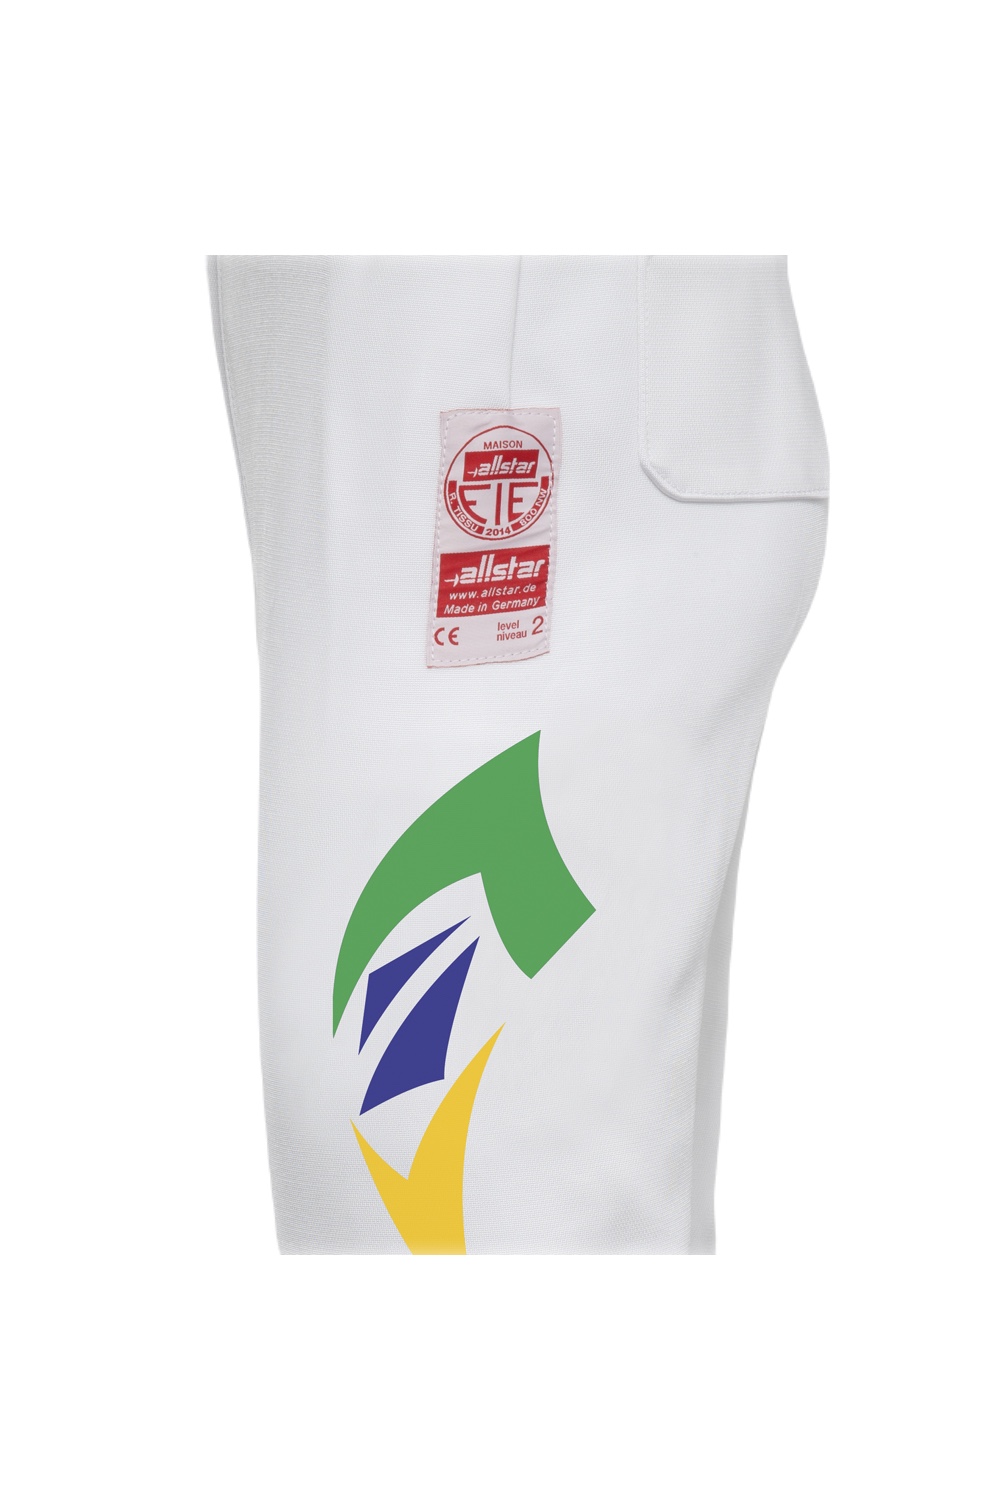 Printing of National Colours on Jackets/Breeches